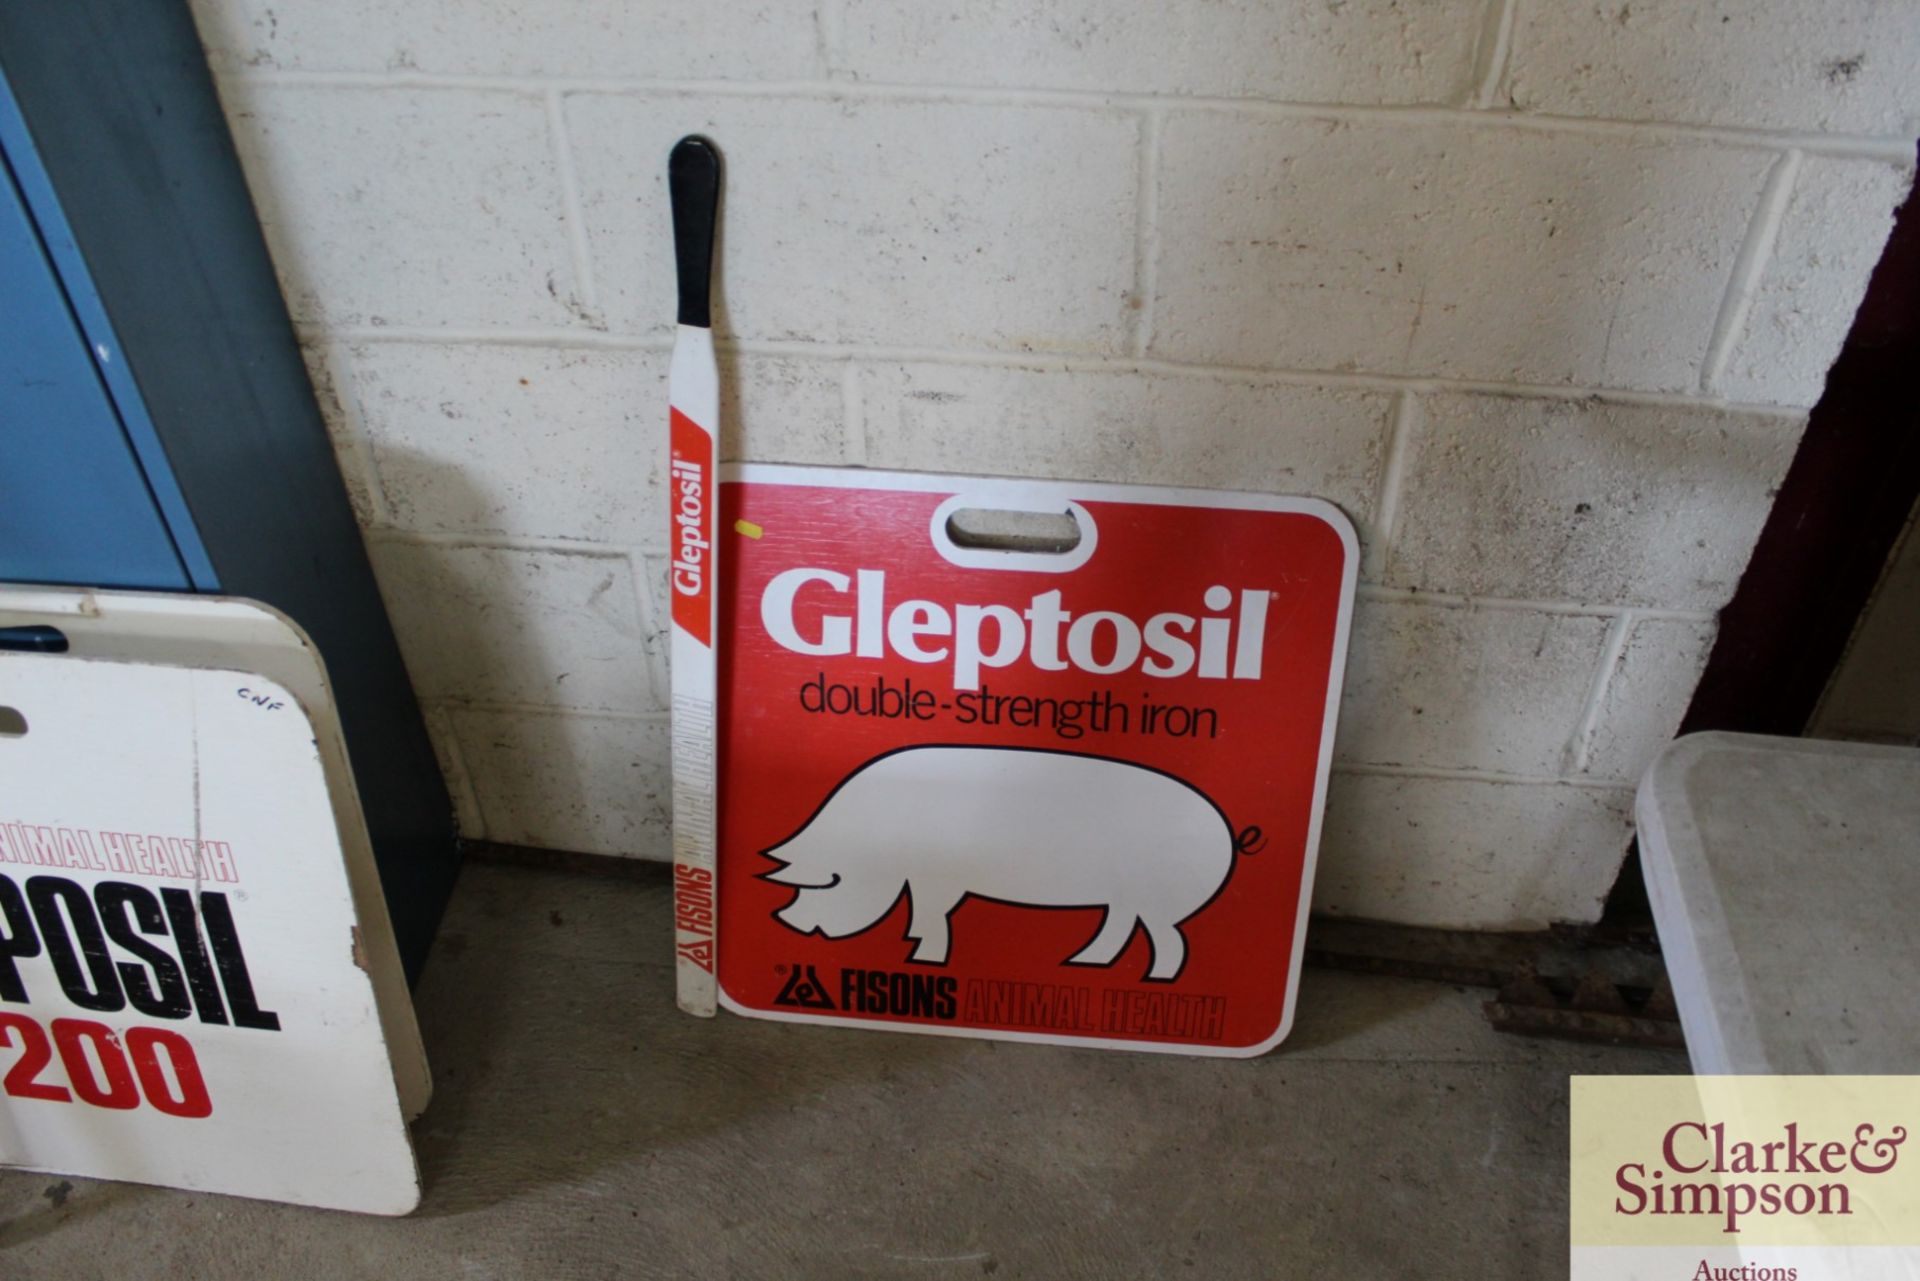 Fisons Animal Health pig showing stick and board.